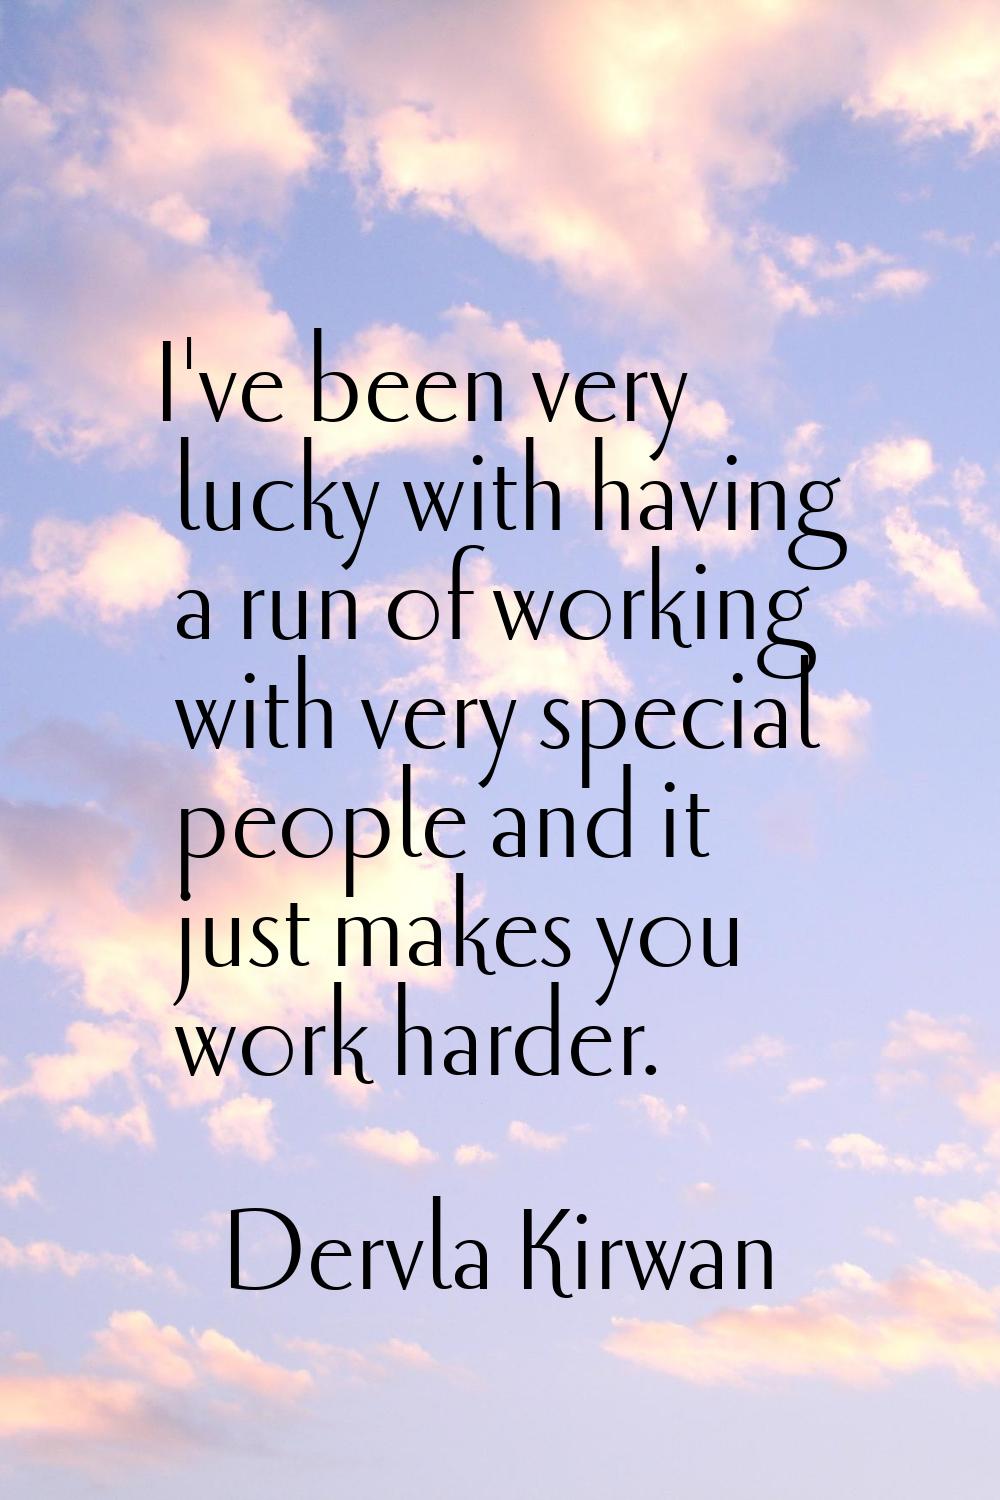 I've been very lucky with having a run of working with very special people and it just makes you wo